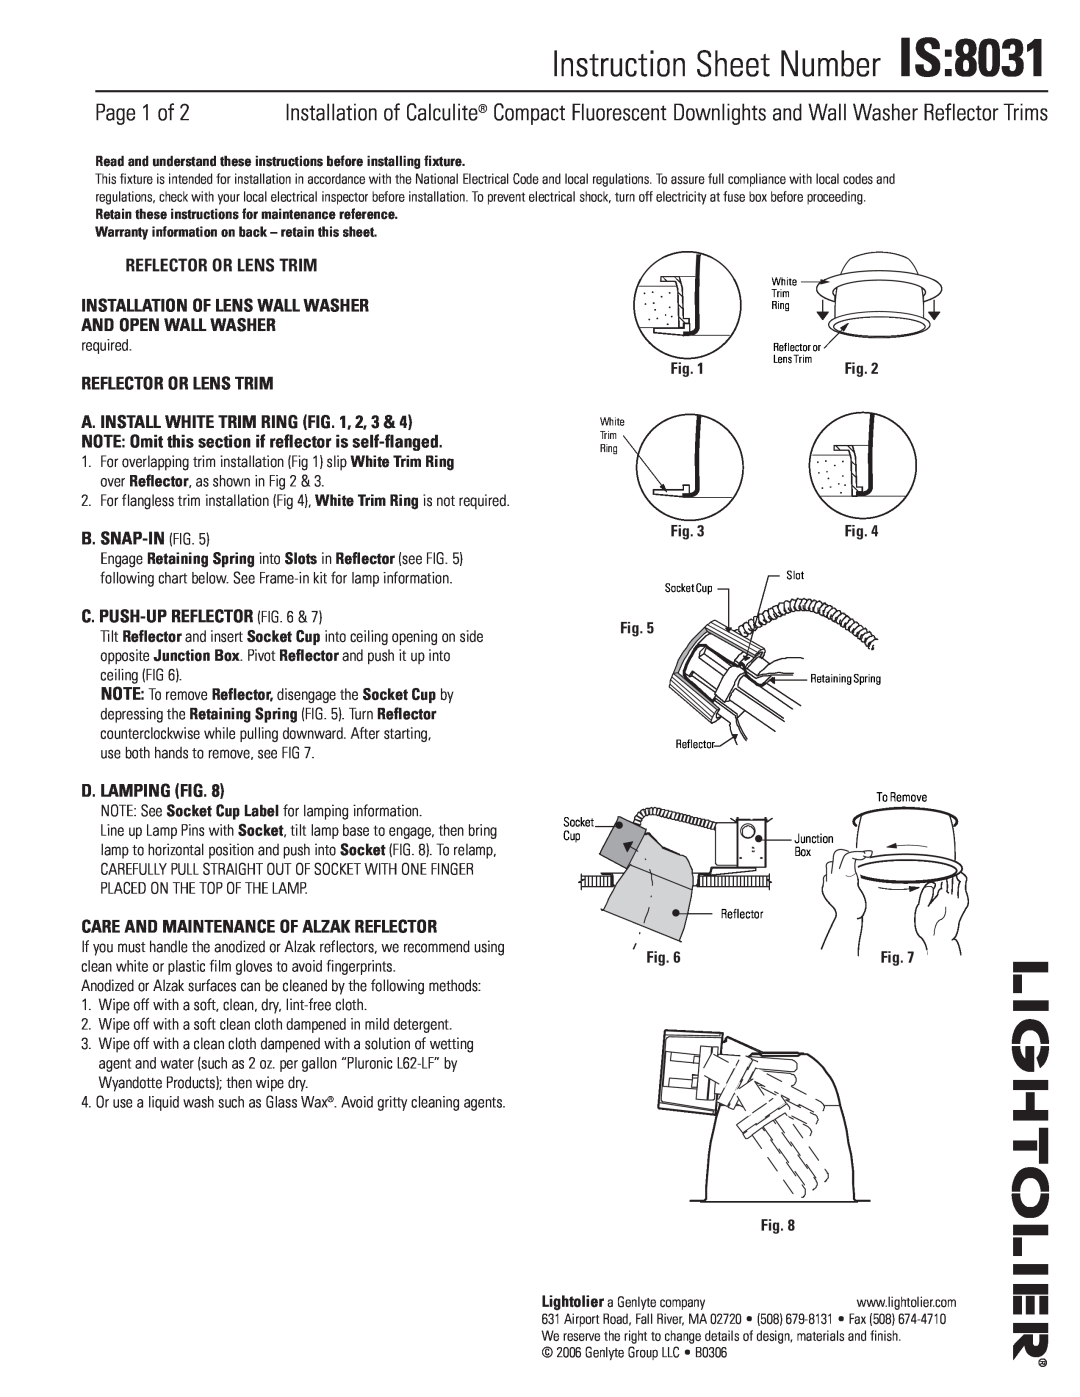 Lightolier 8031 instruction sheet Instruction Sheet Number IS, Page 1 of, Reflector Or Lens Trim, And Open Wall Washer 